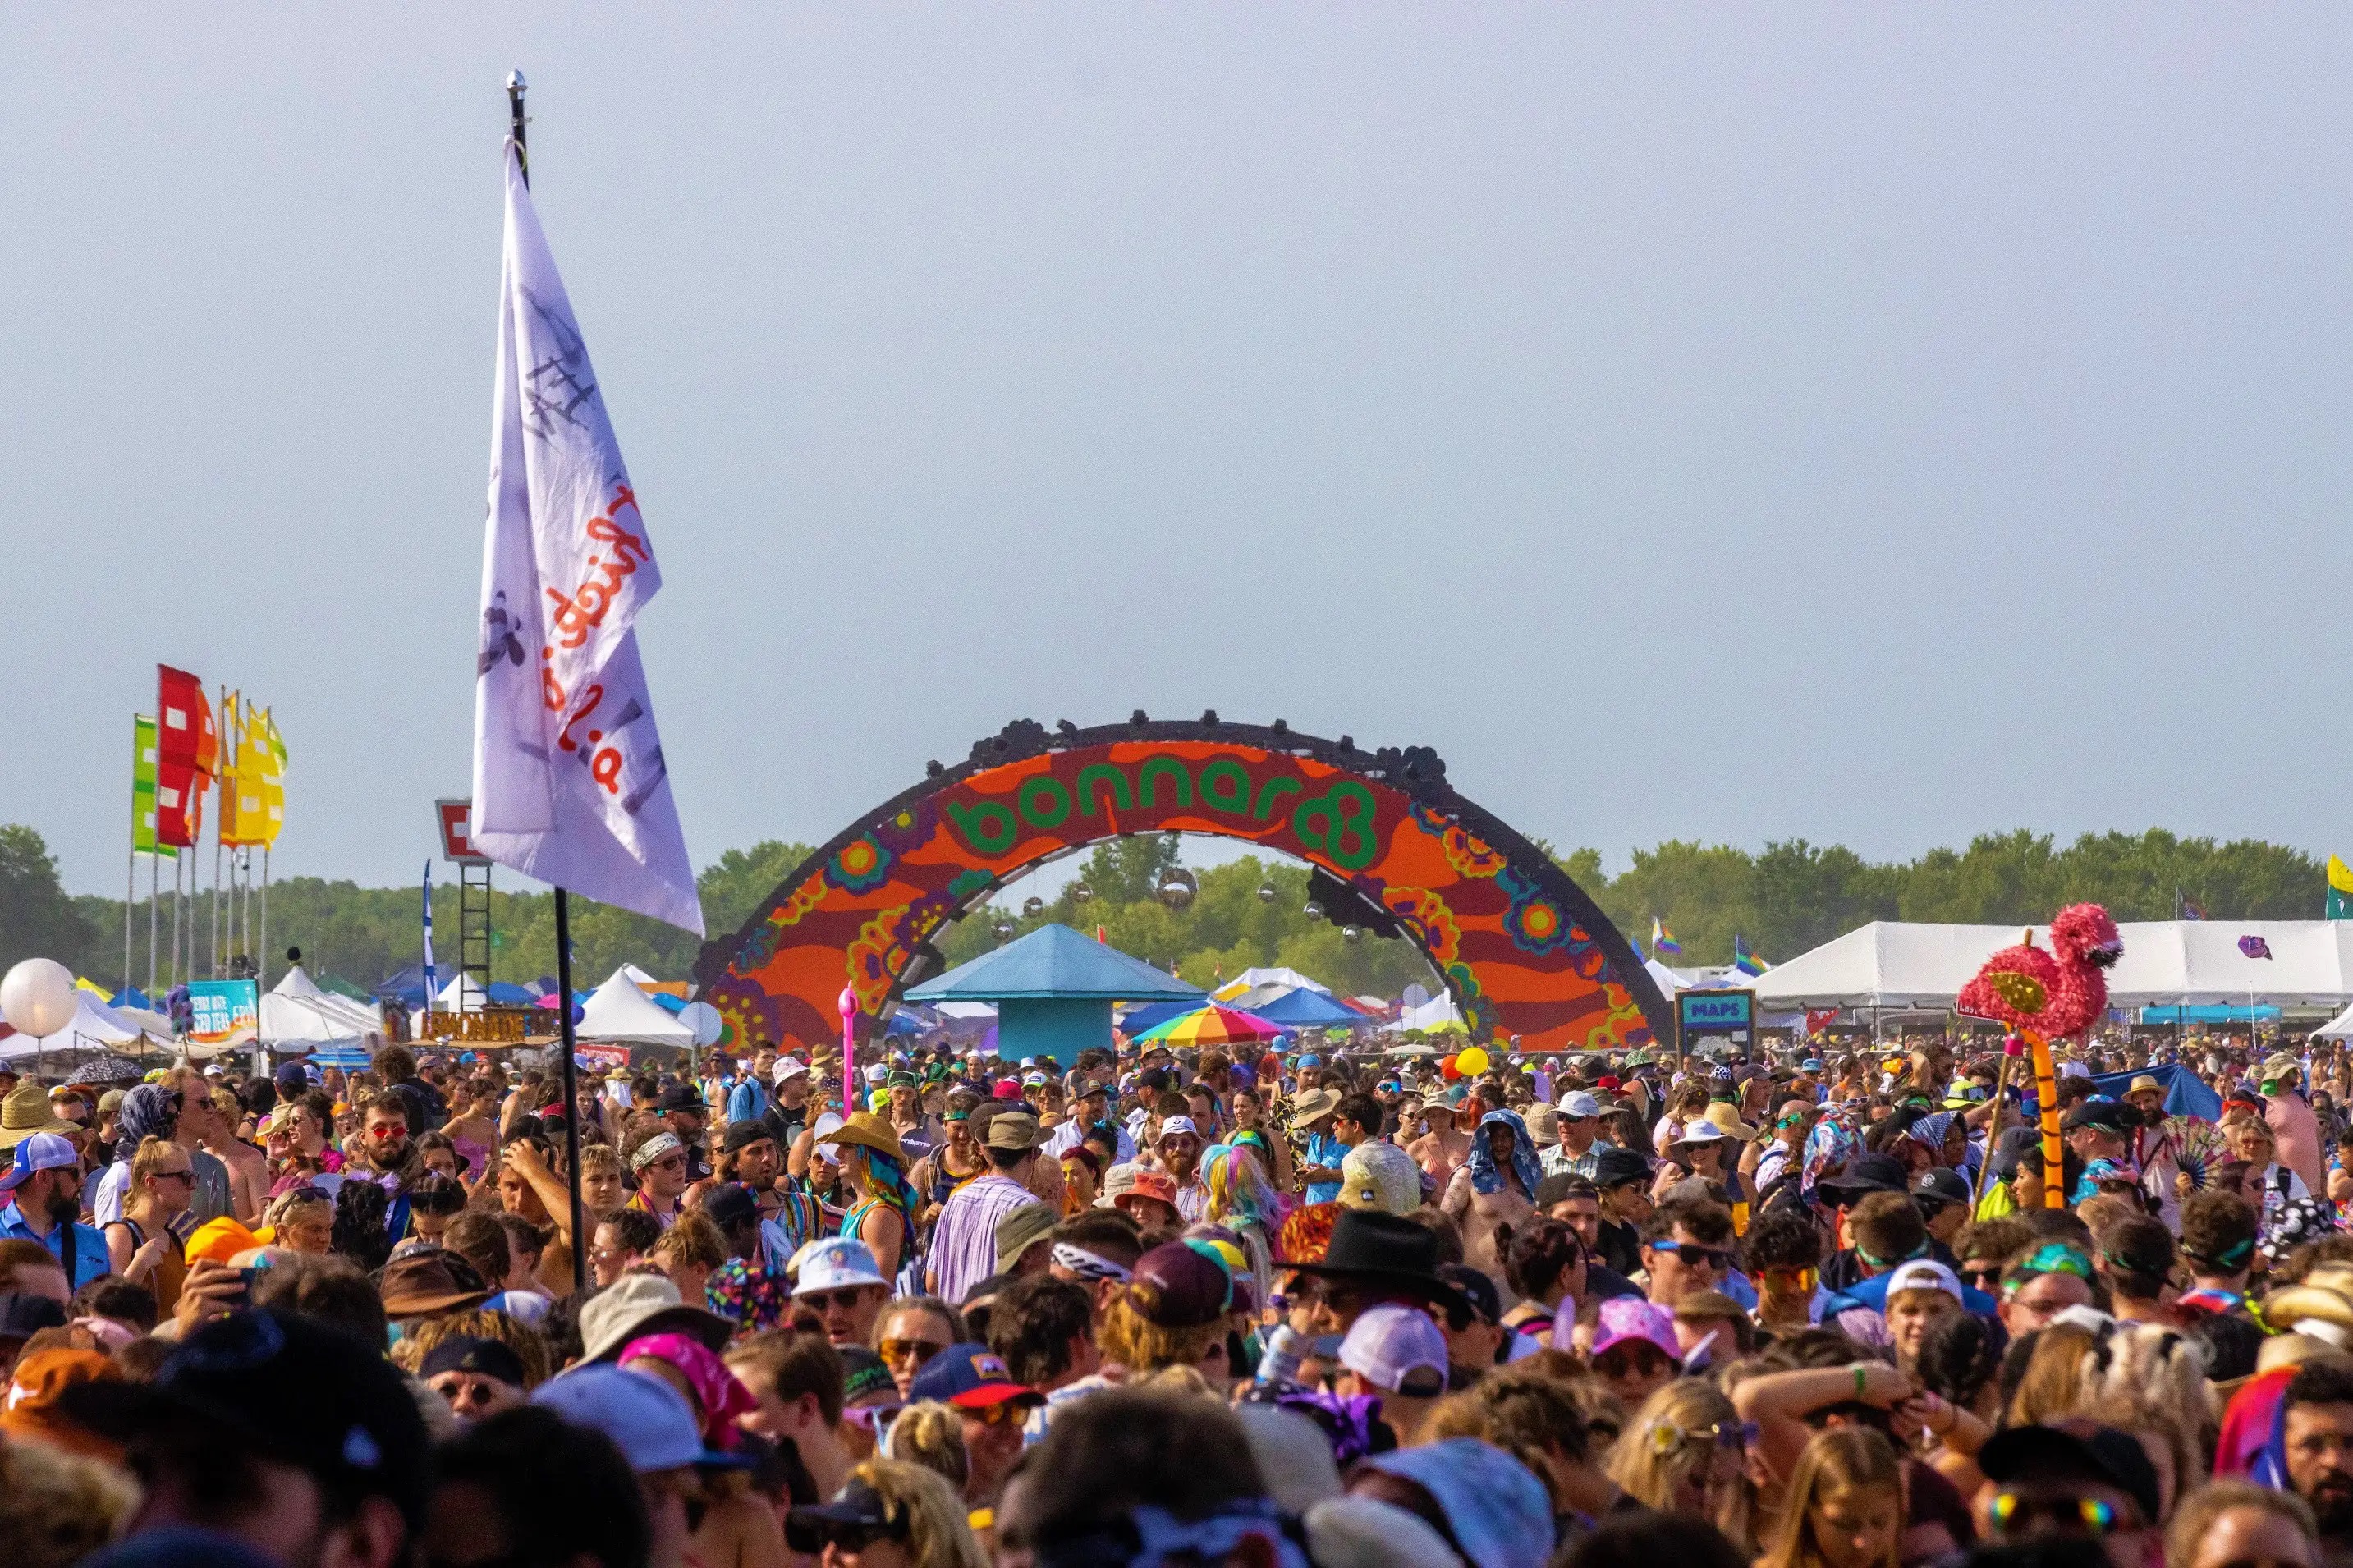 Spotify Launch and Bonnaroo Partnerships Highlight Opportunities for Environmental Action